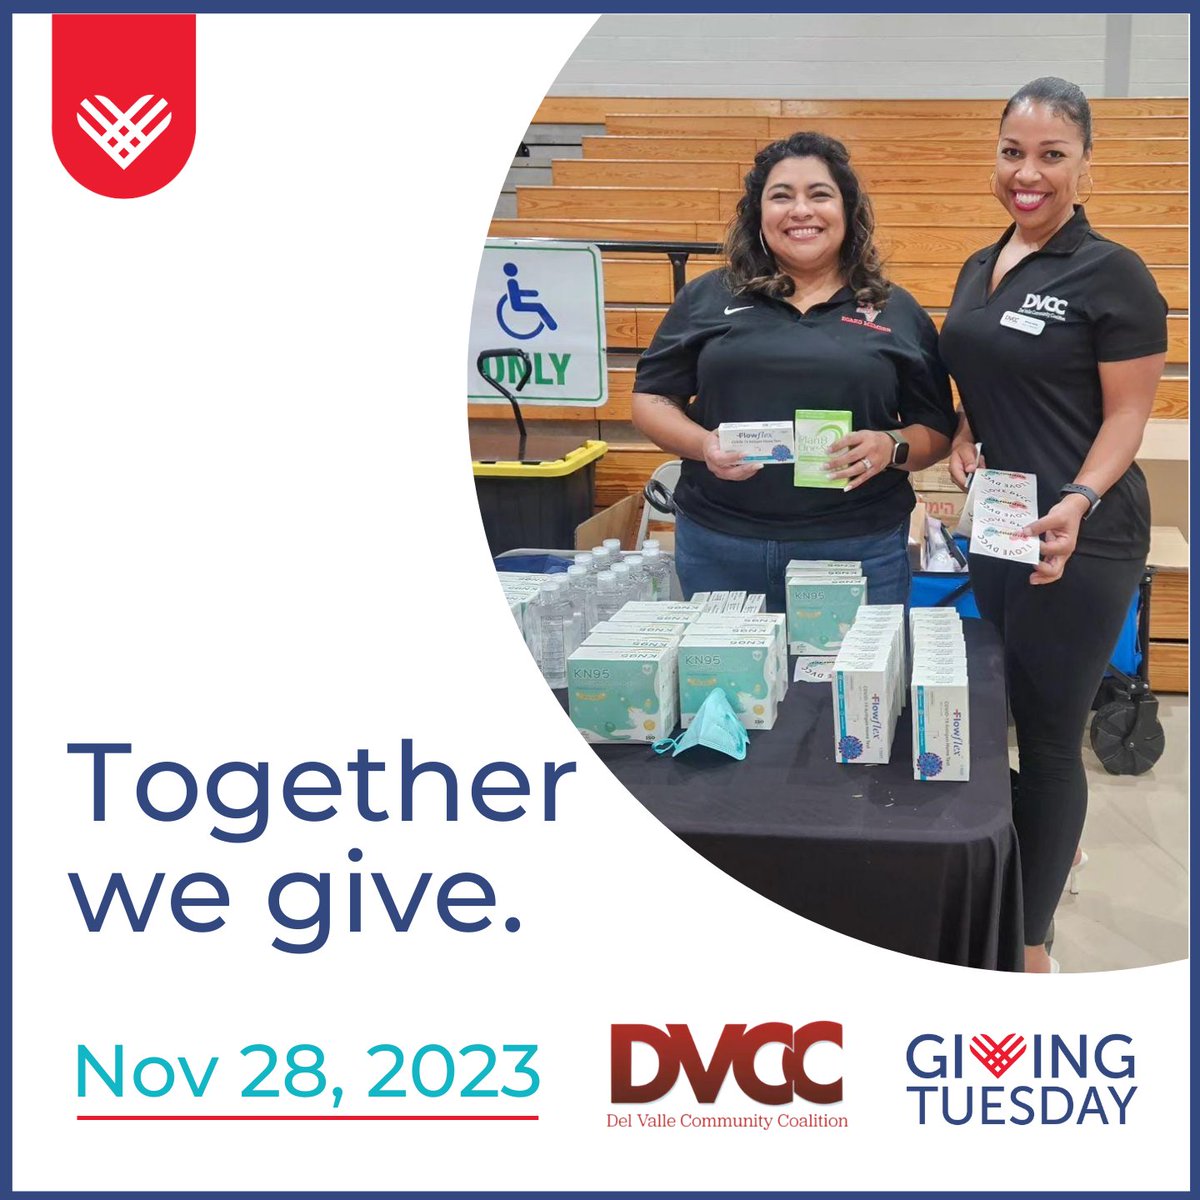 Happy #GivingTuesday Central Texas! 📷Join the worldwide day of giving by making a donation or joining our volunteer list to support our mission work today at atxdvcc.org/donations